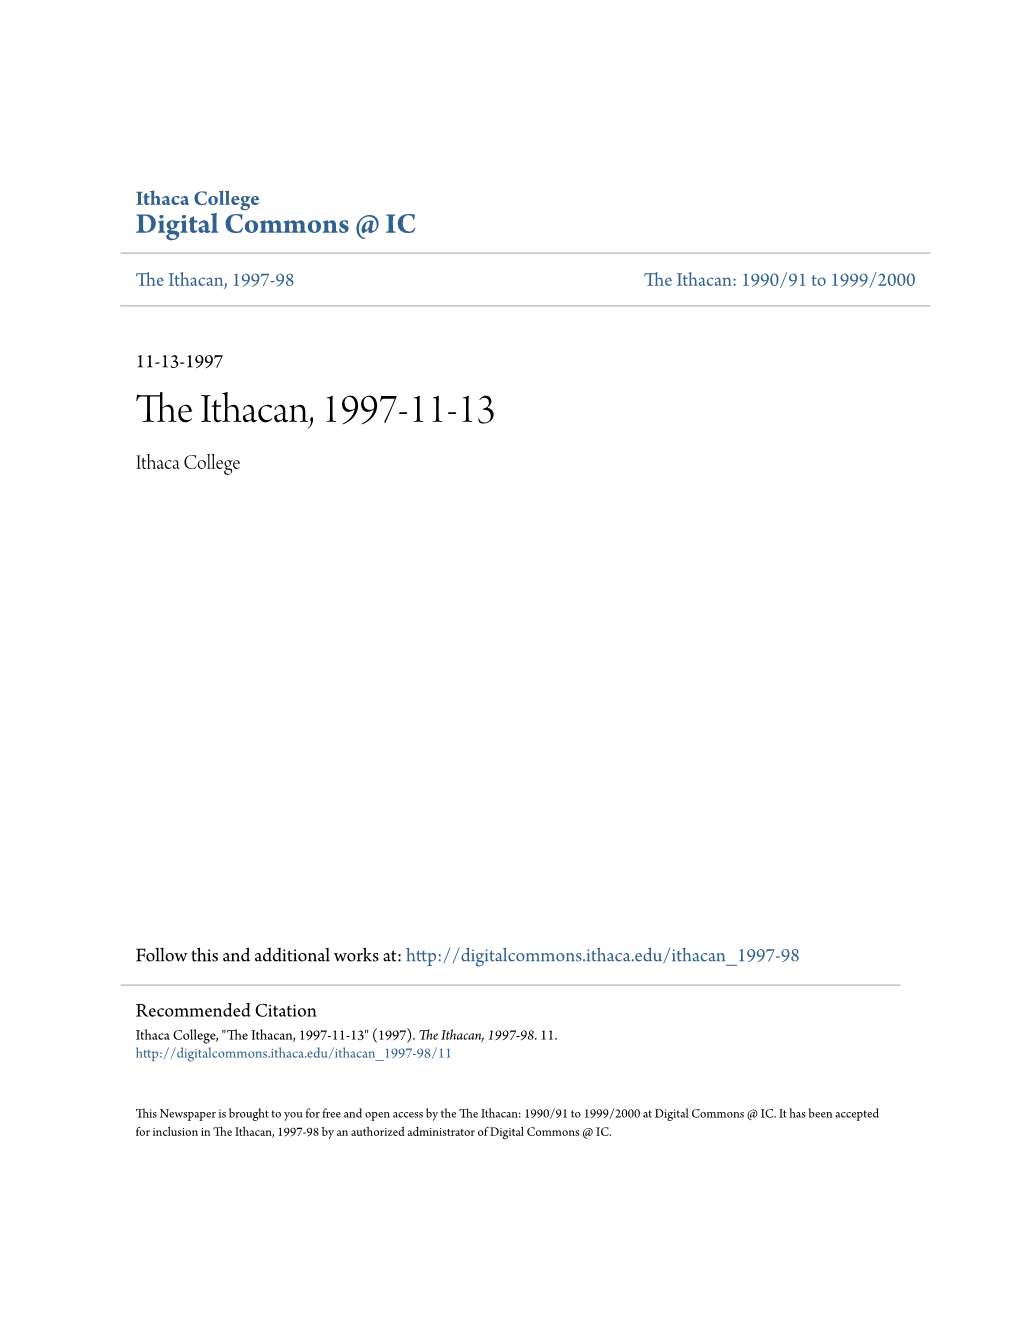 The Ithacan, 1997-11-13